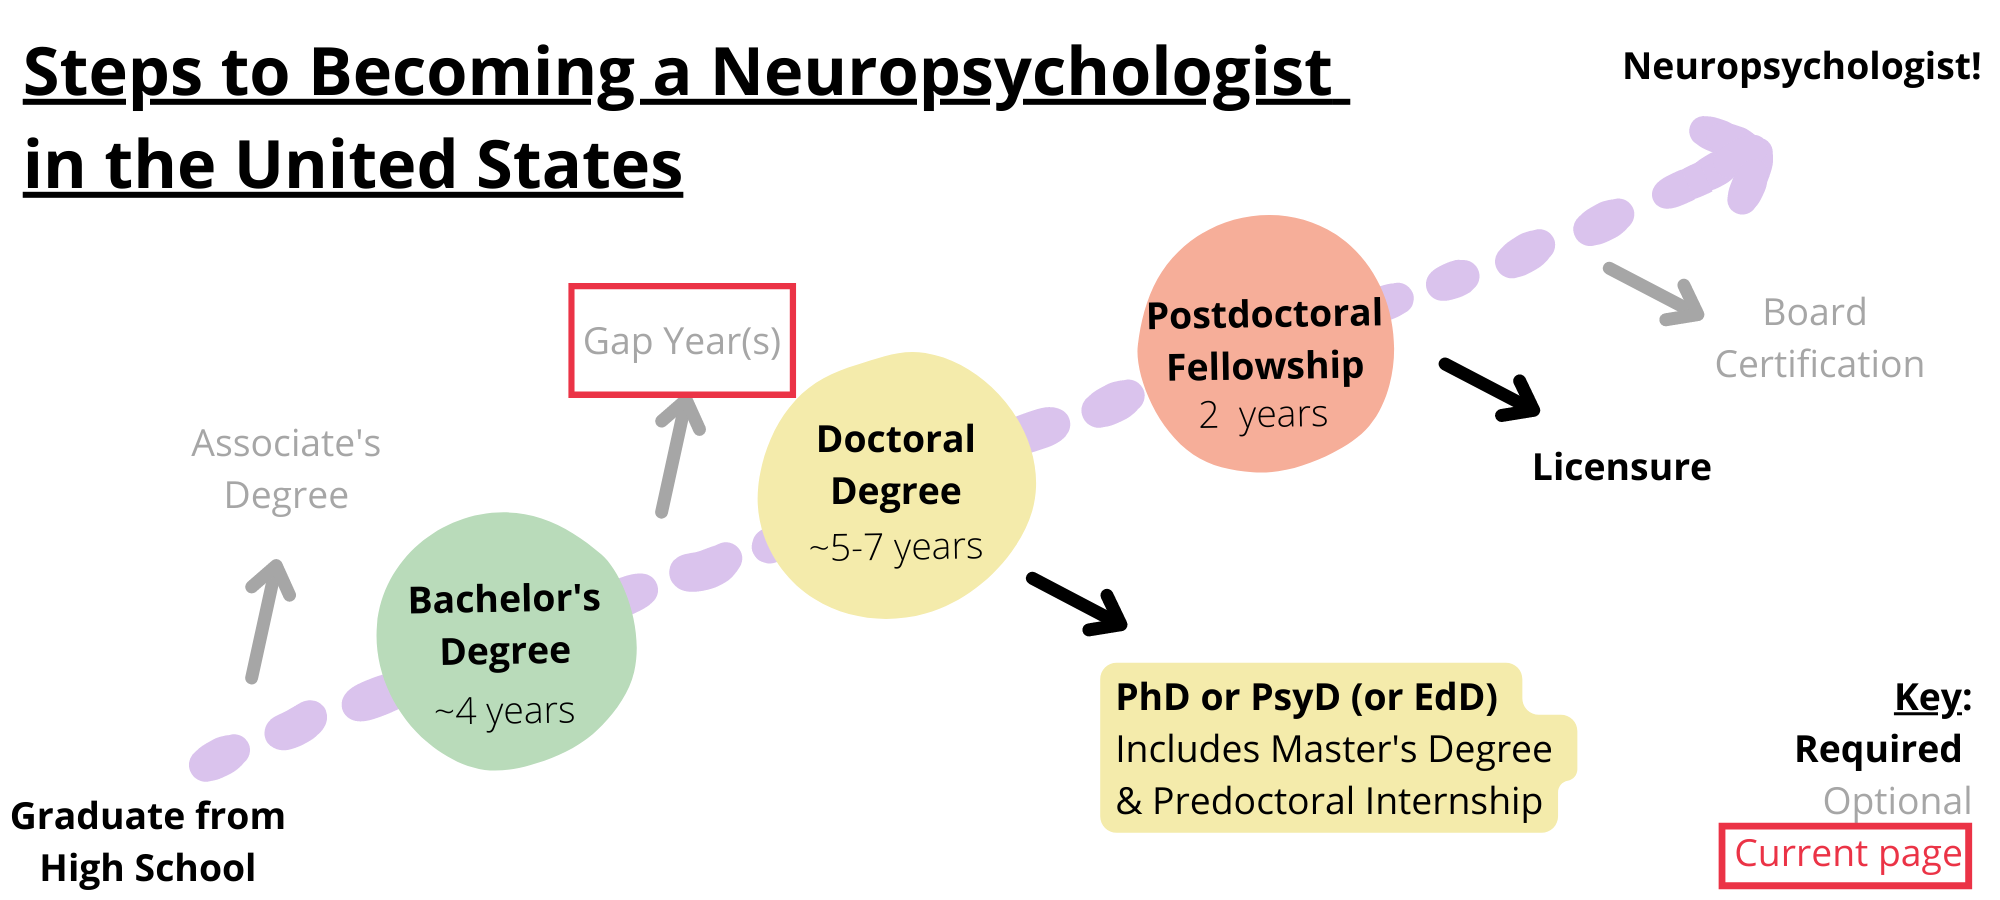 Steps to becoming a neuropsychologist in the United States. Required steps include graduating from high school, obtaining a bachelor’s degree, obtaining a doctoral degree like a PhD, PsyD, or EdD, completing a postdoctoral fellowship, and licensure. Optional steps include obtaining an associate’s degree, taking a gap year, and board certification. You are on the step gap year